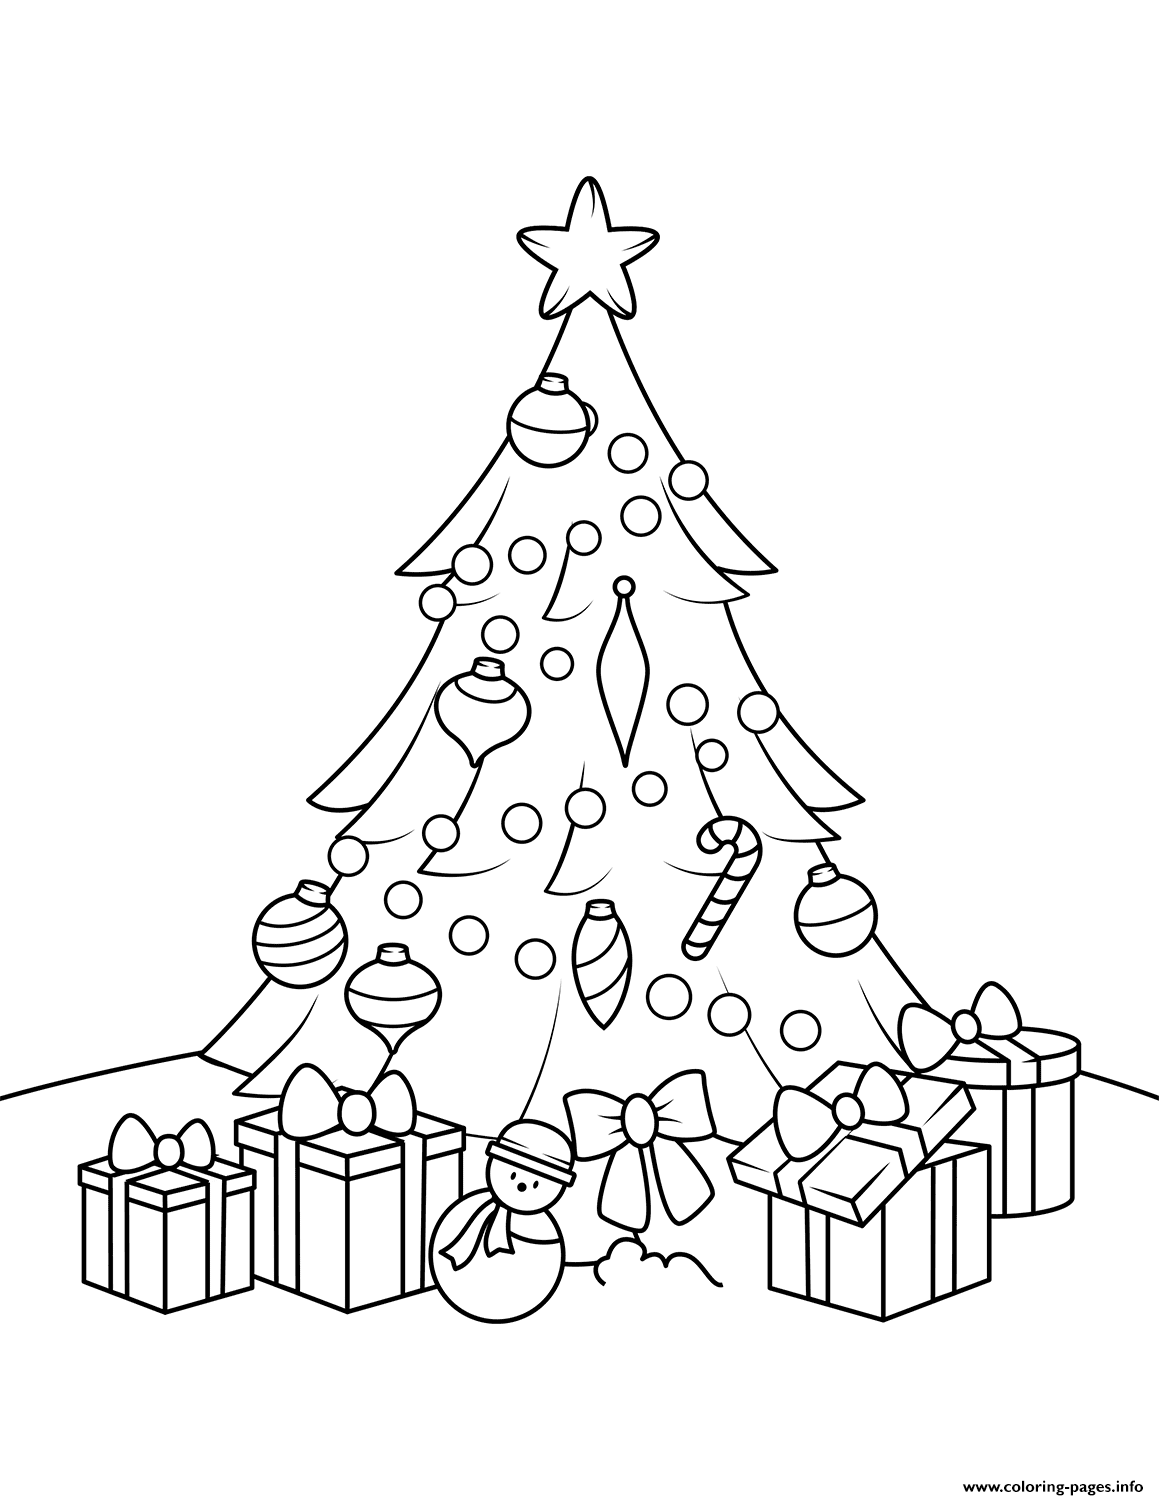 Christmas Tree With Presents coloring